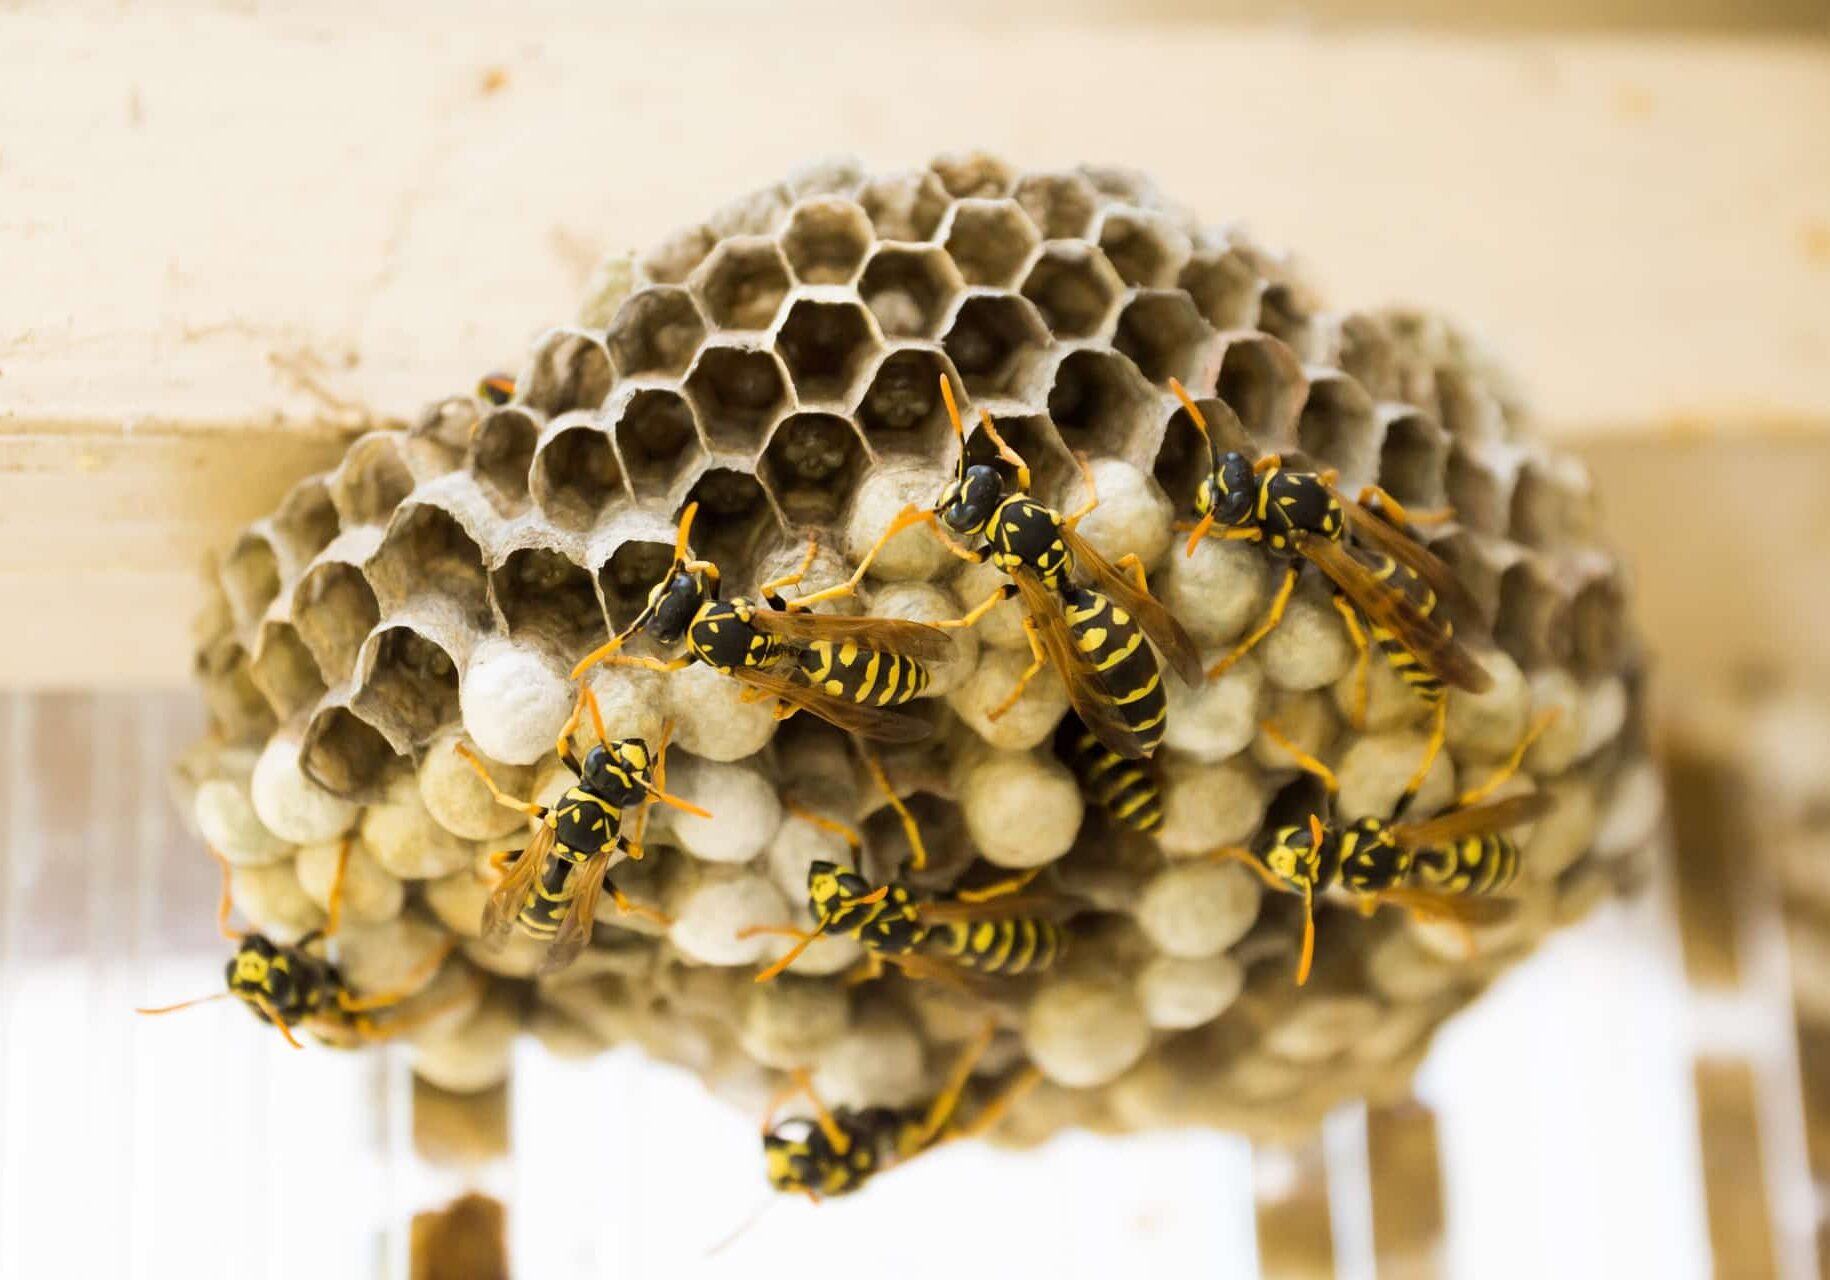 wasp-nest-gf2ded1478_1920